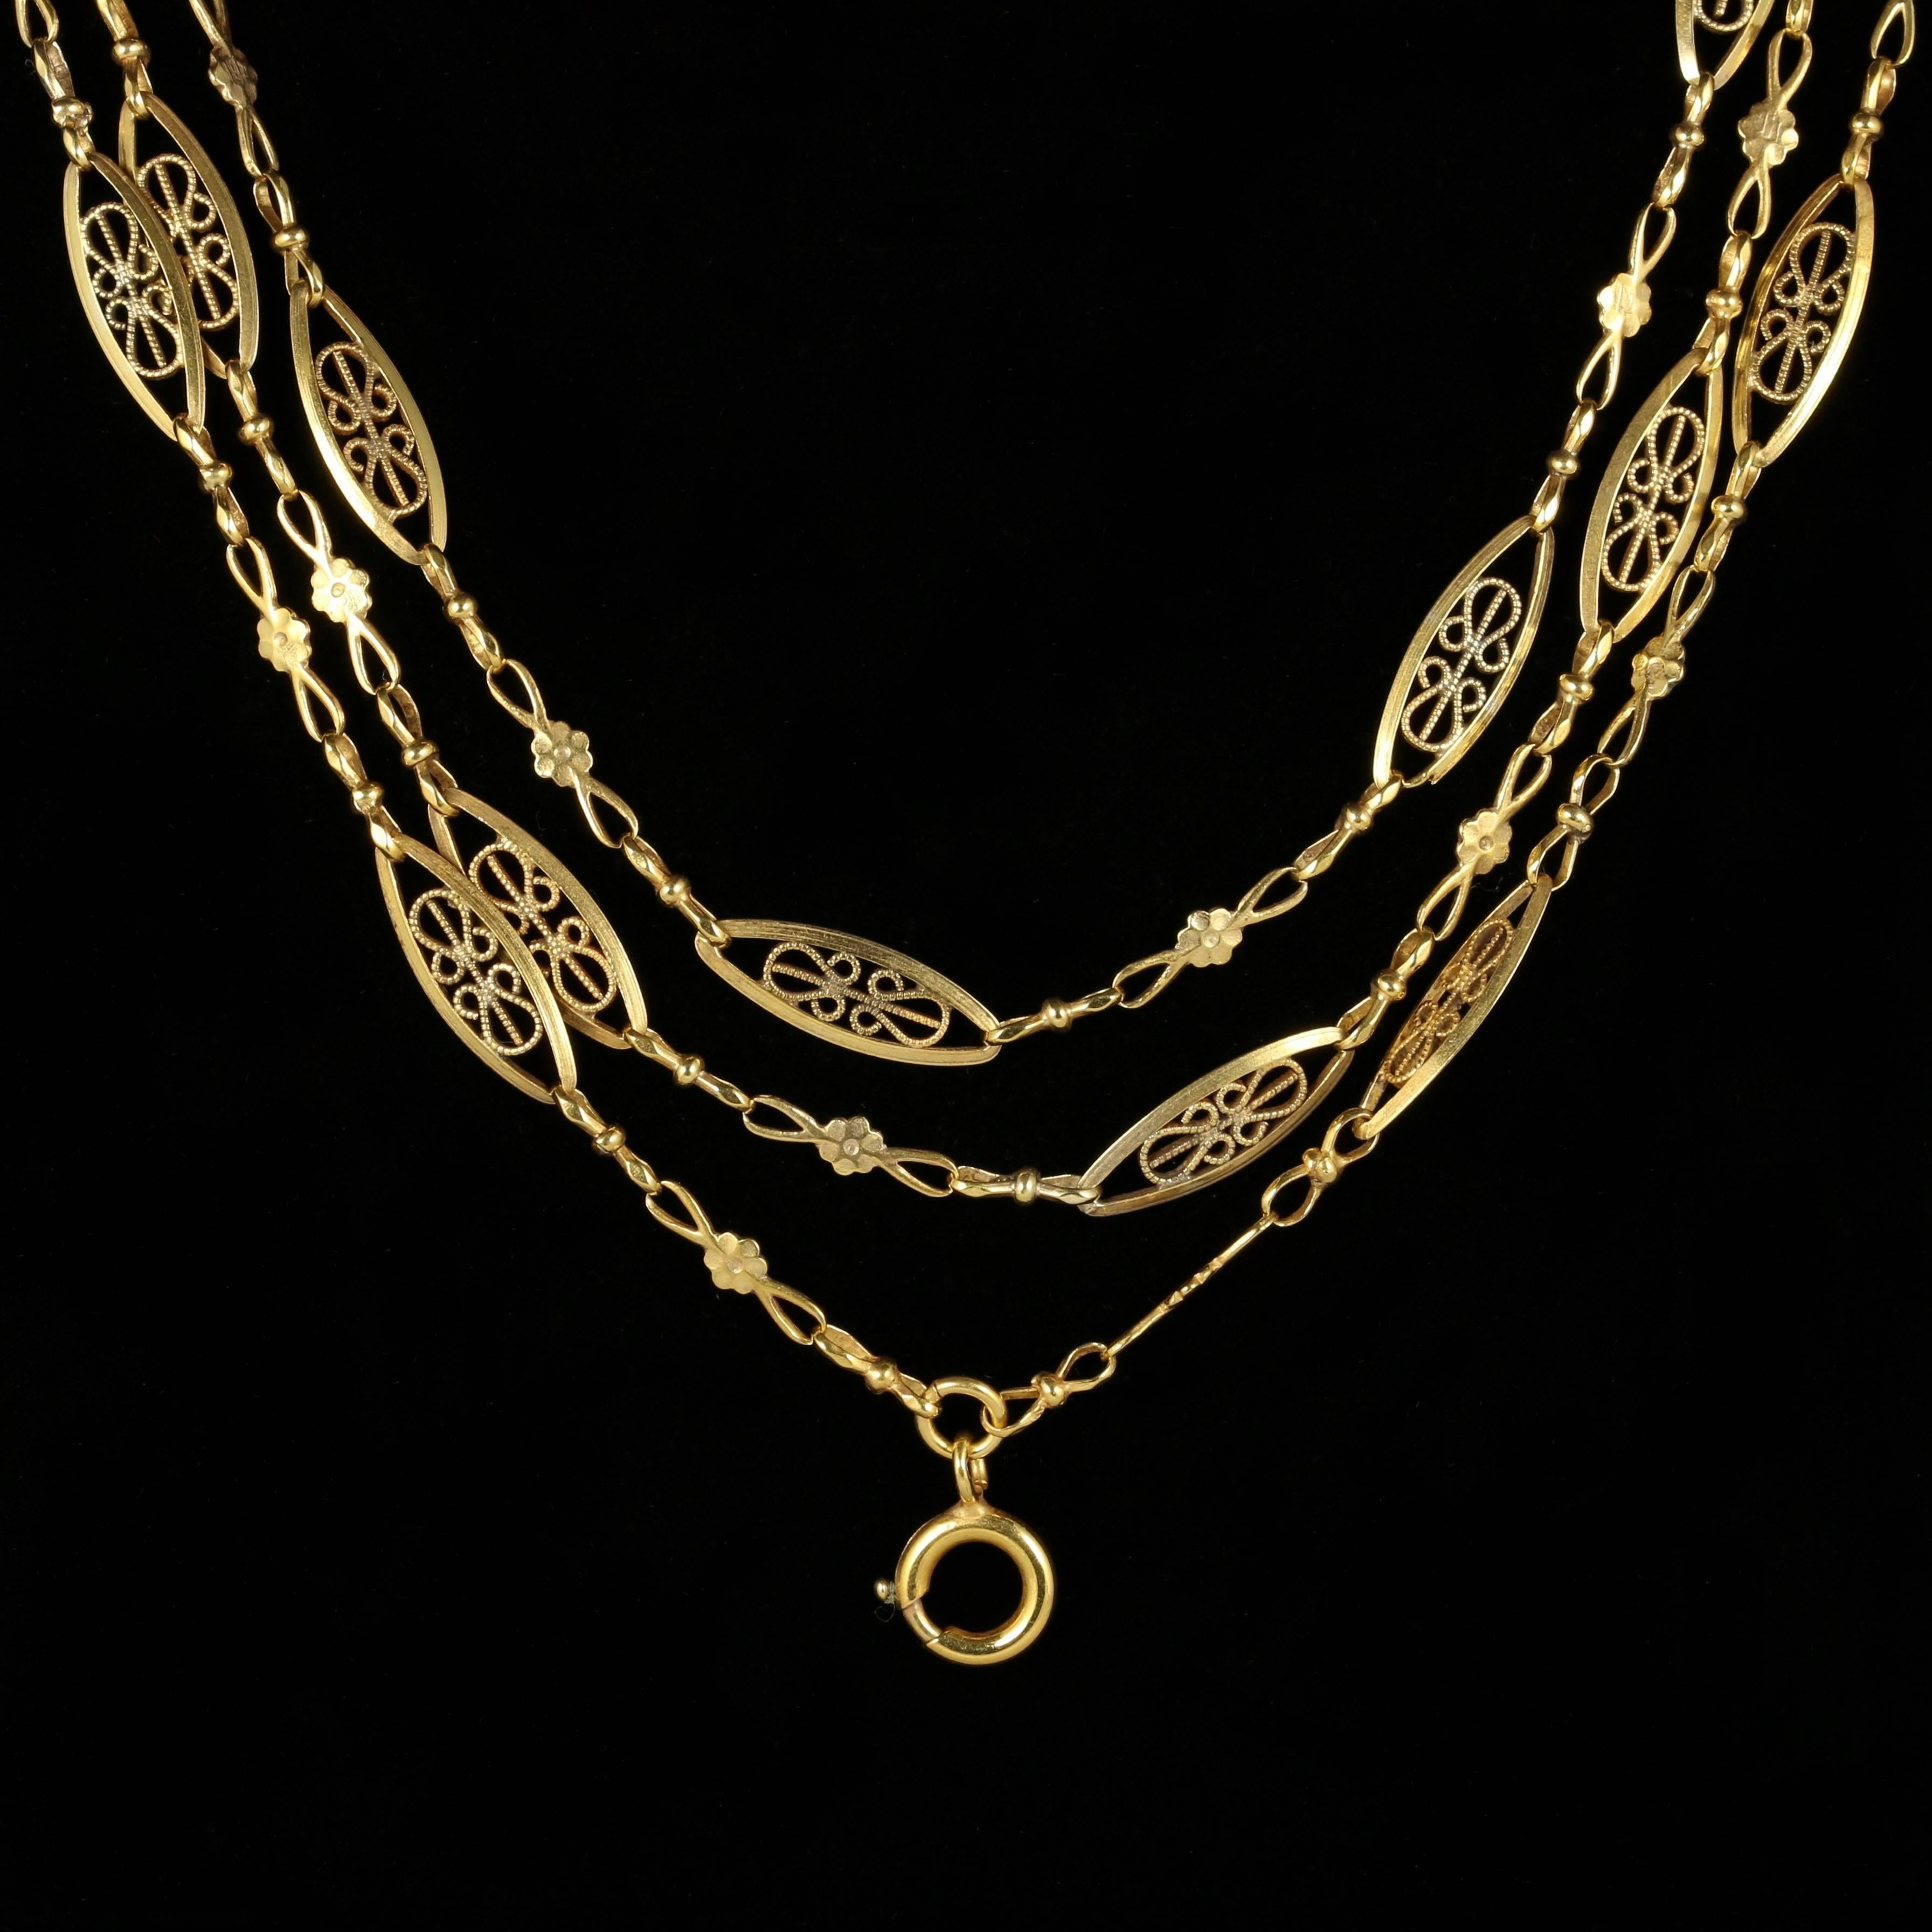 A fabulous long antique French sautoir chain set with lovely fancy panels and floral links set in 18ct Yellow Gold on Silver.

A Sautoir necklace is a French term for a long chain that runs down to the waist. They were popular in the 1900s and were